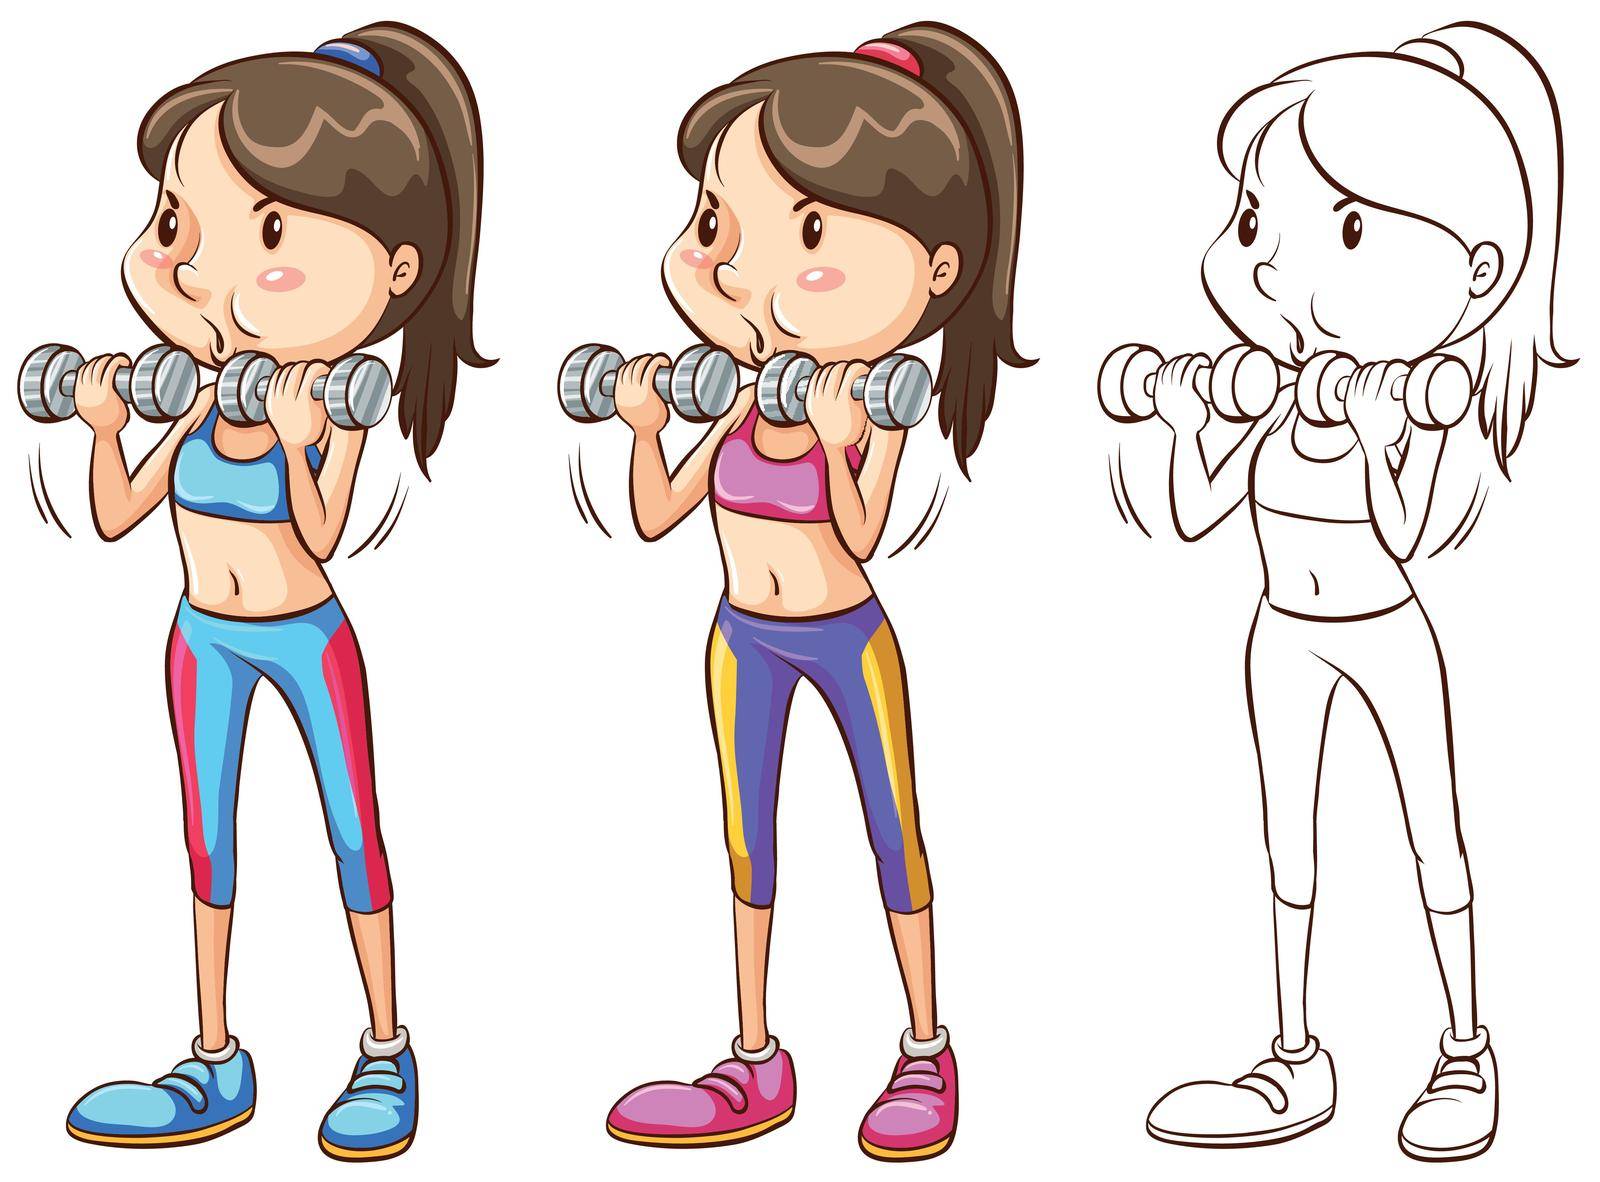 Doodle character for woman doing weight training illustration